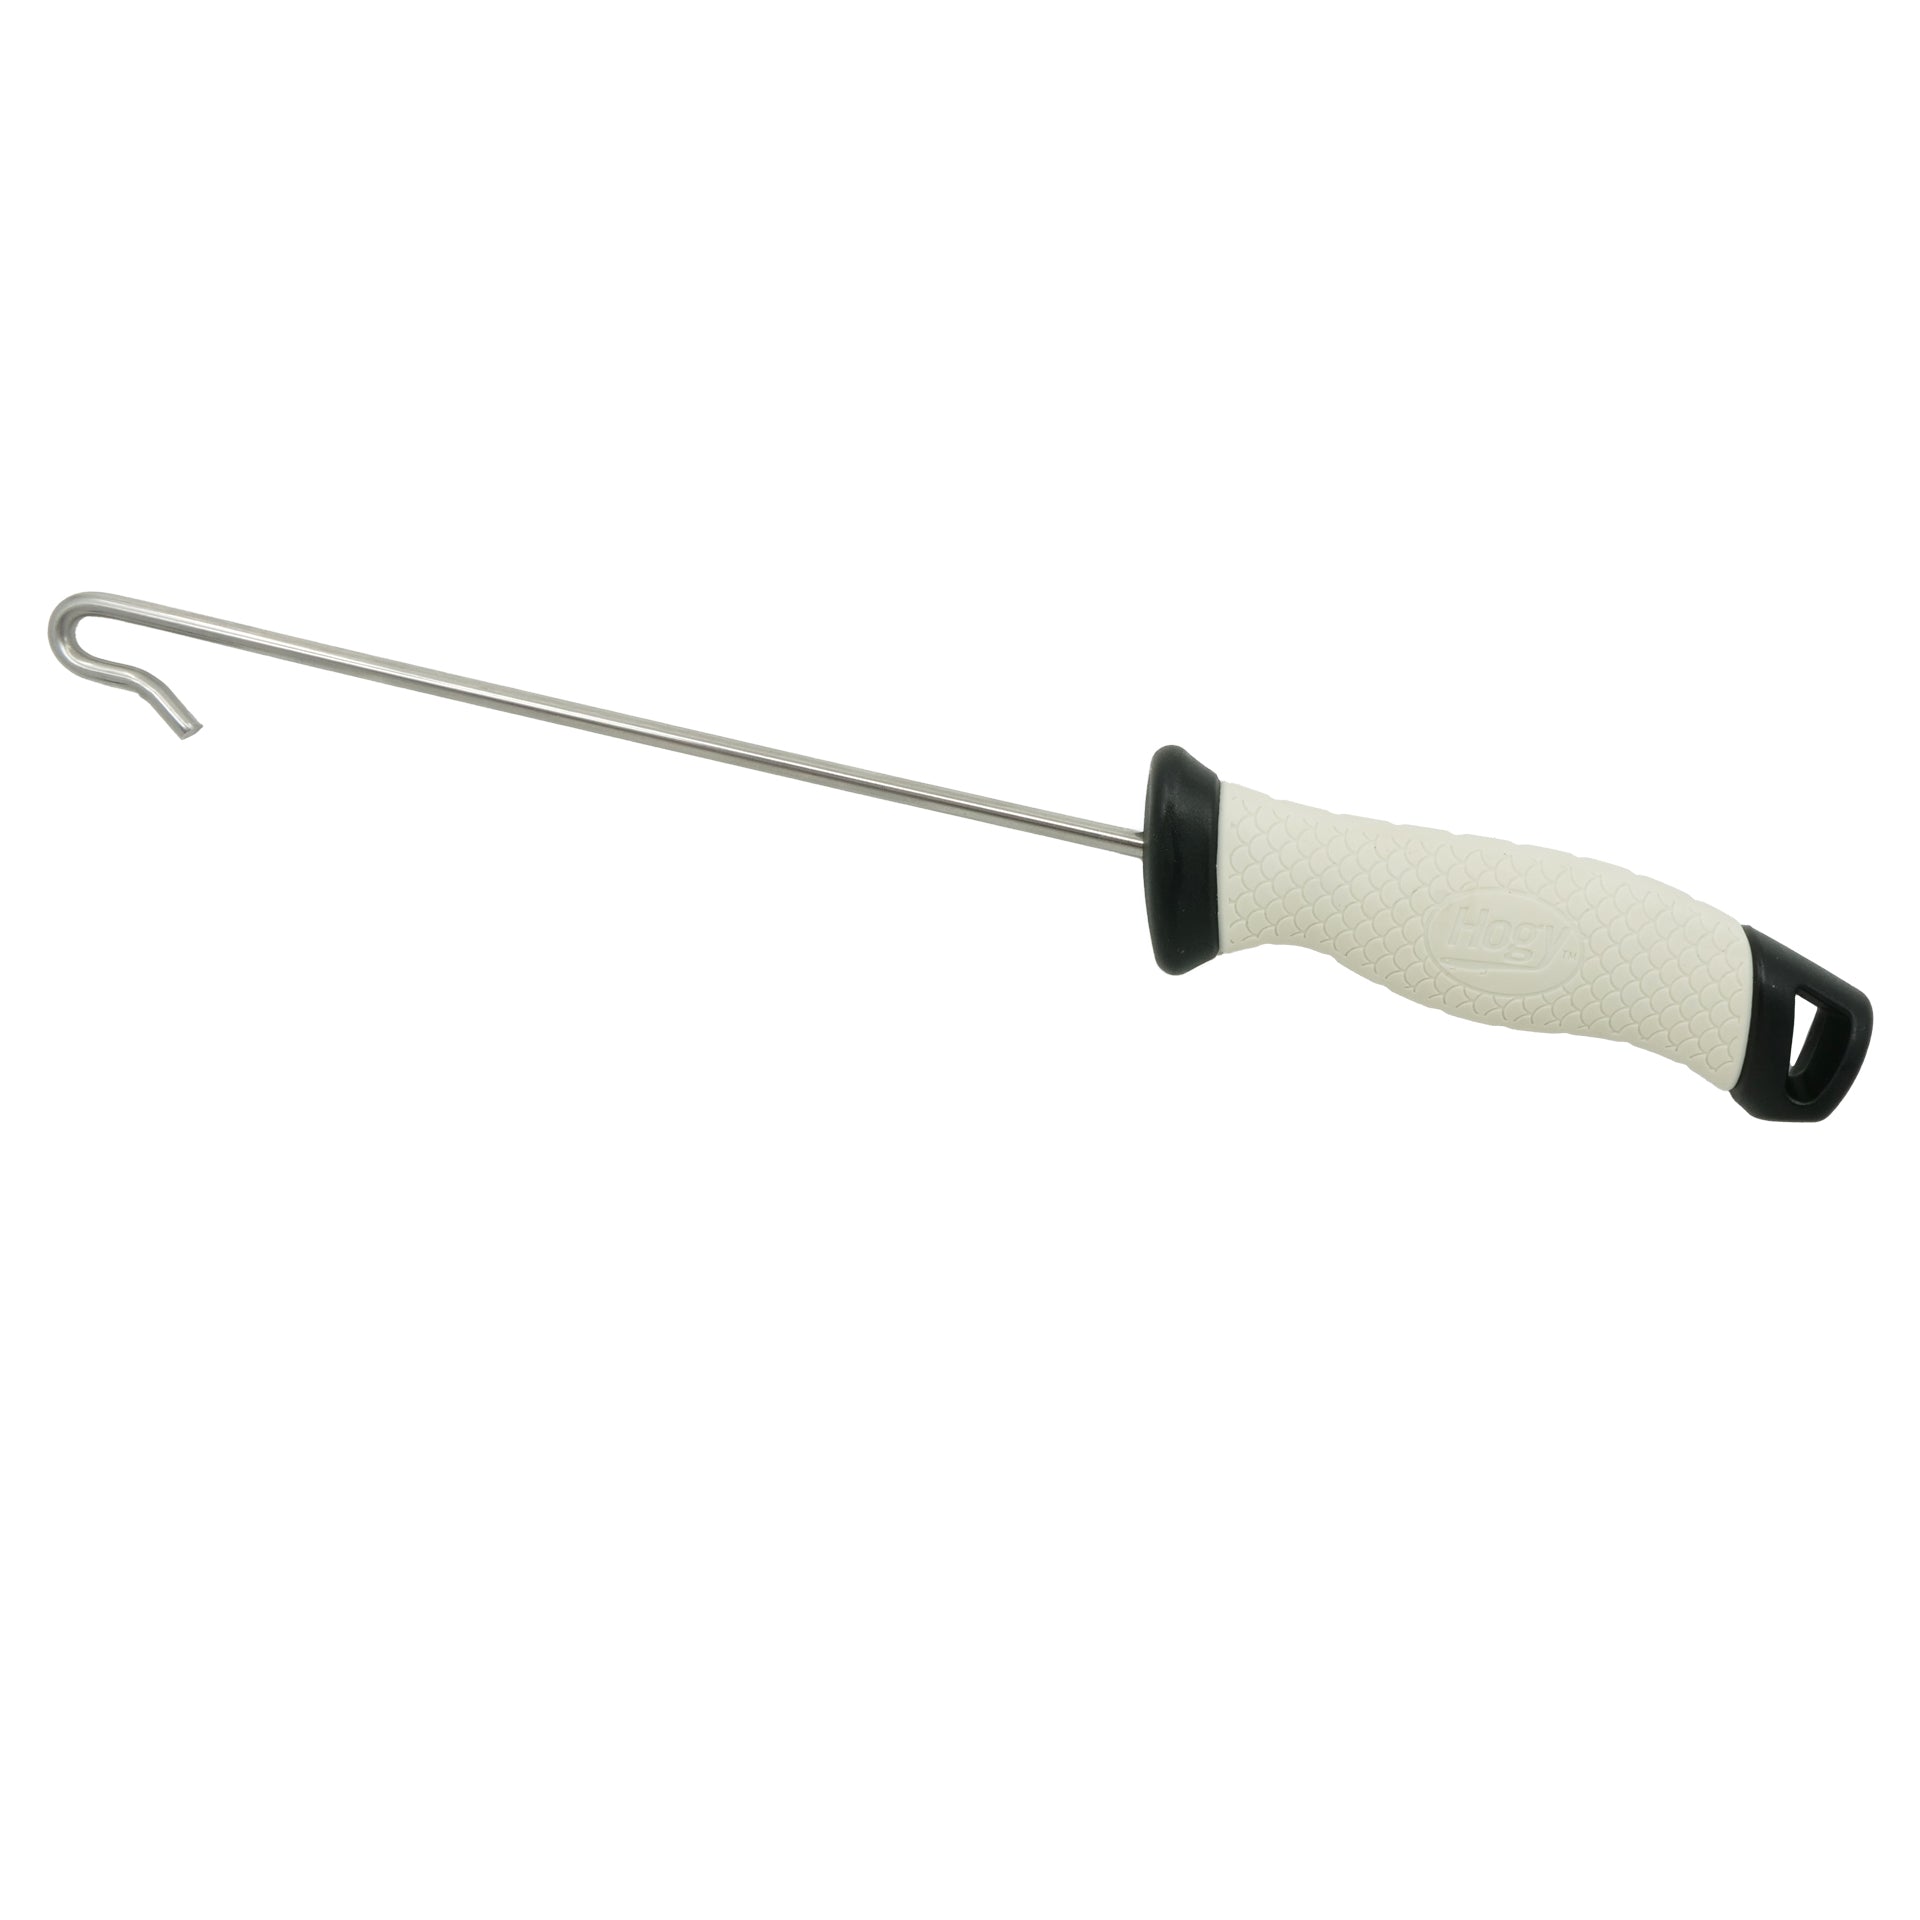 Buy Stainless Meat Hook online